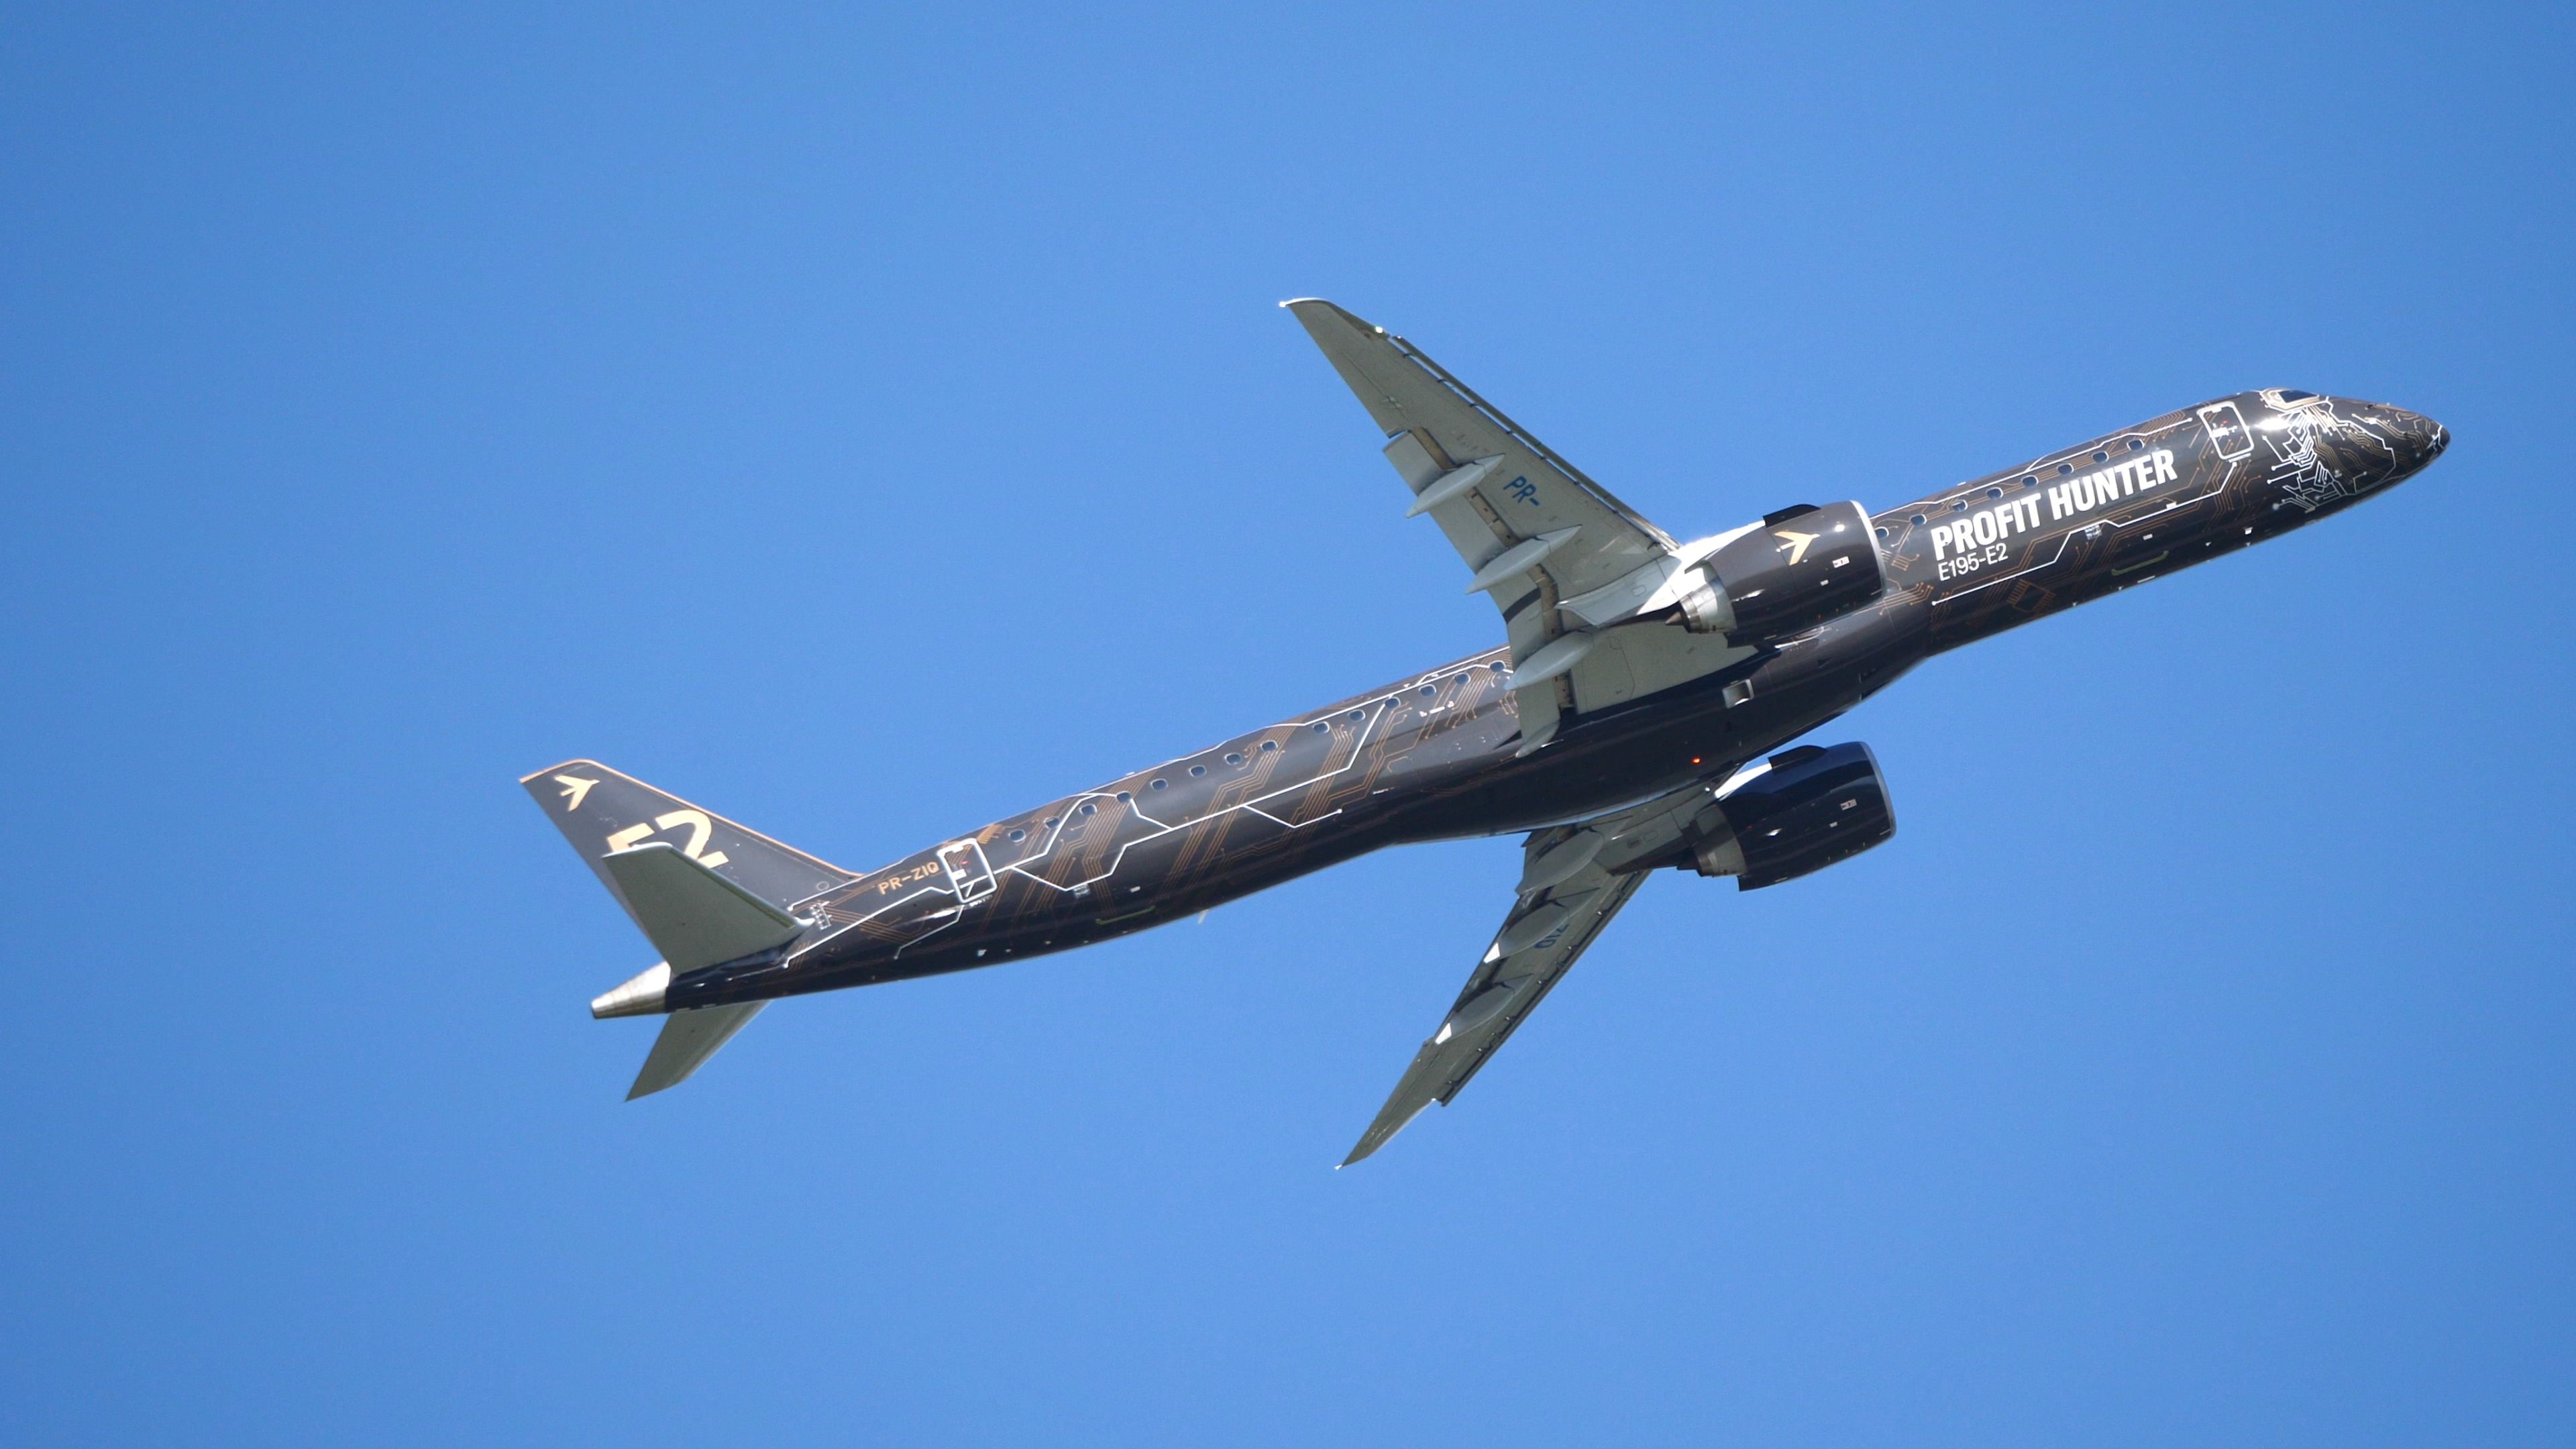 An Embraer E195-E2 flying in the sky.